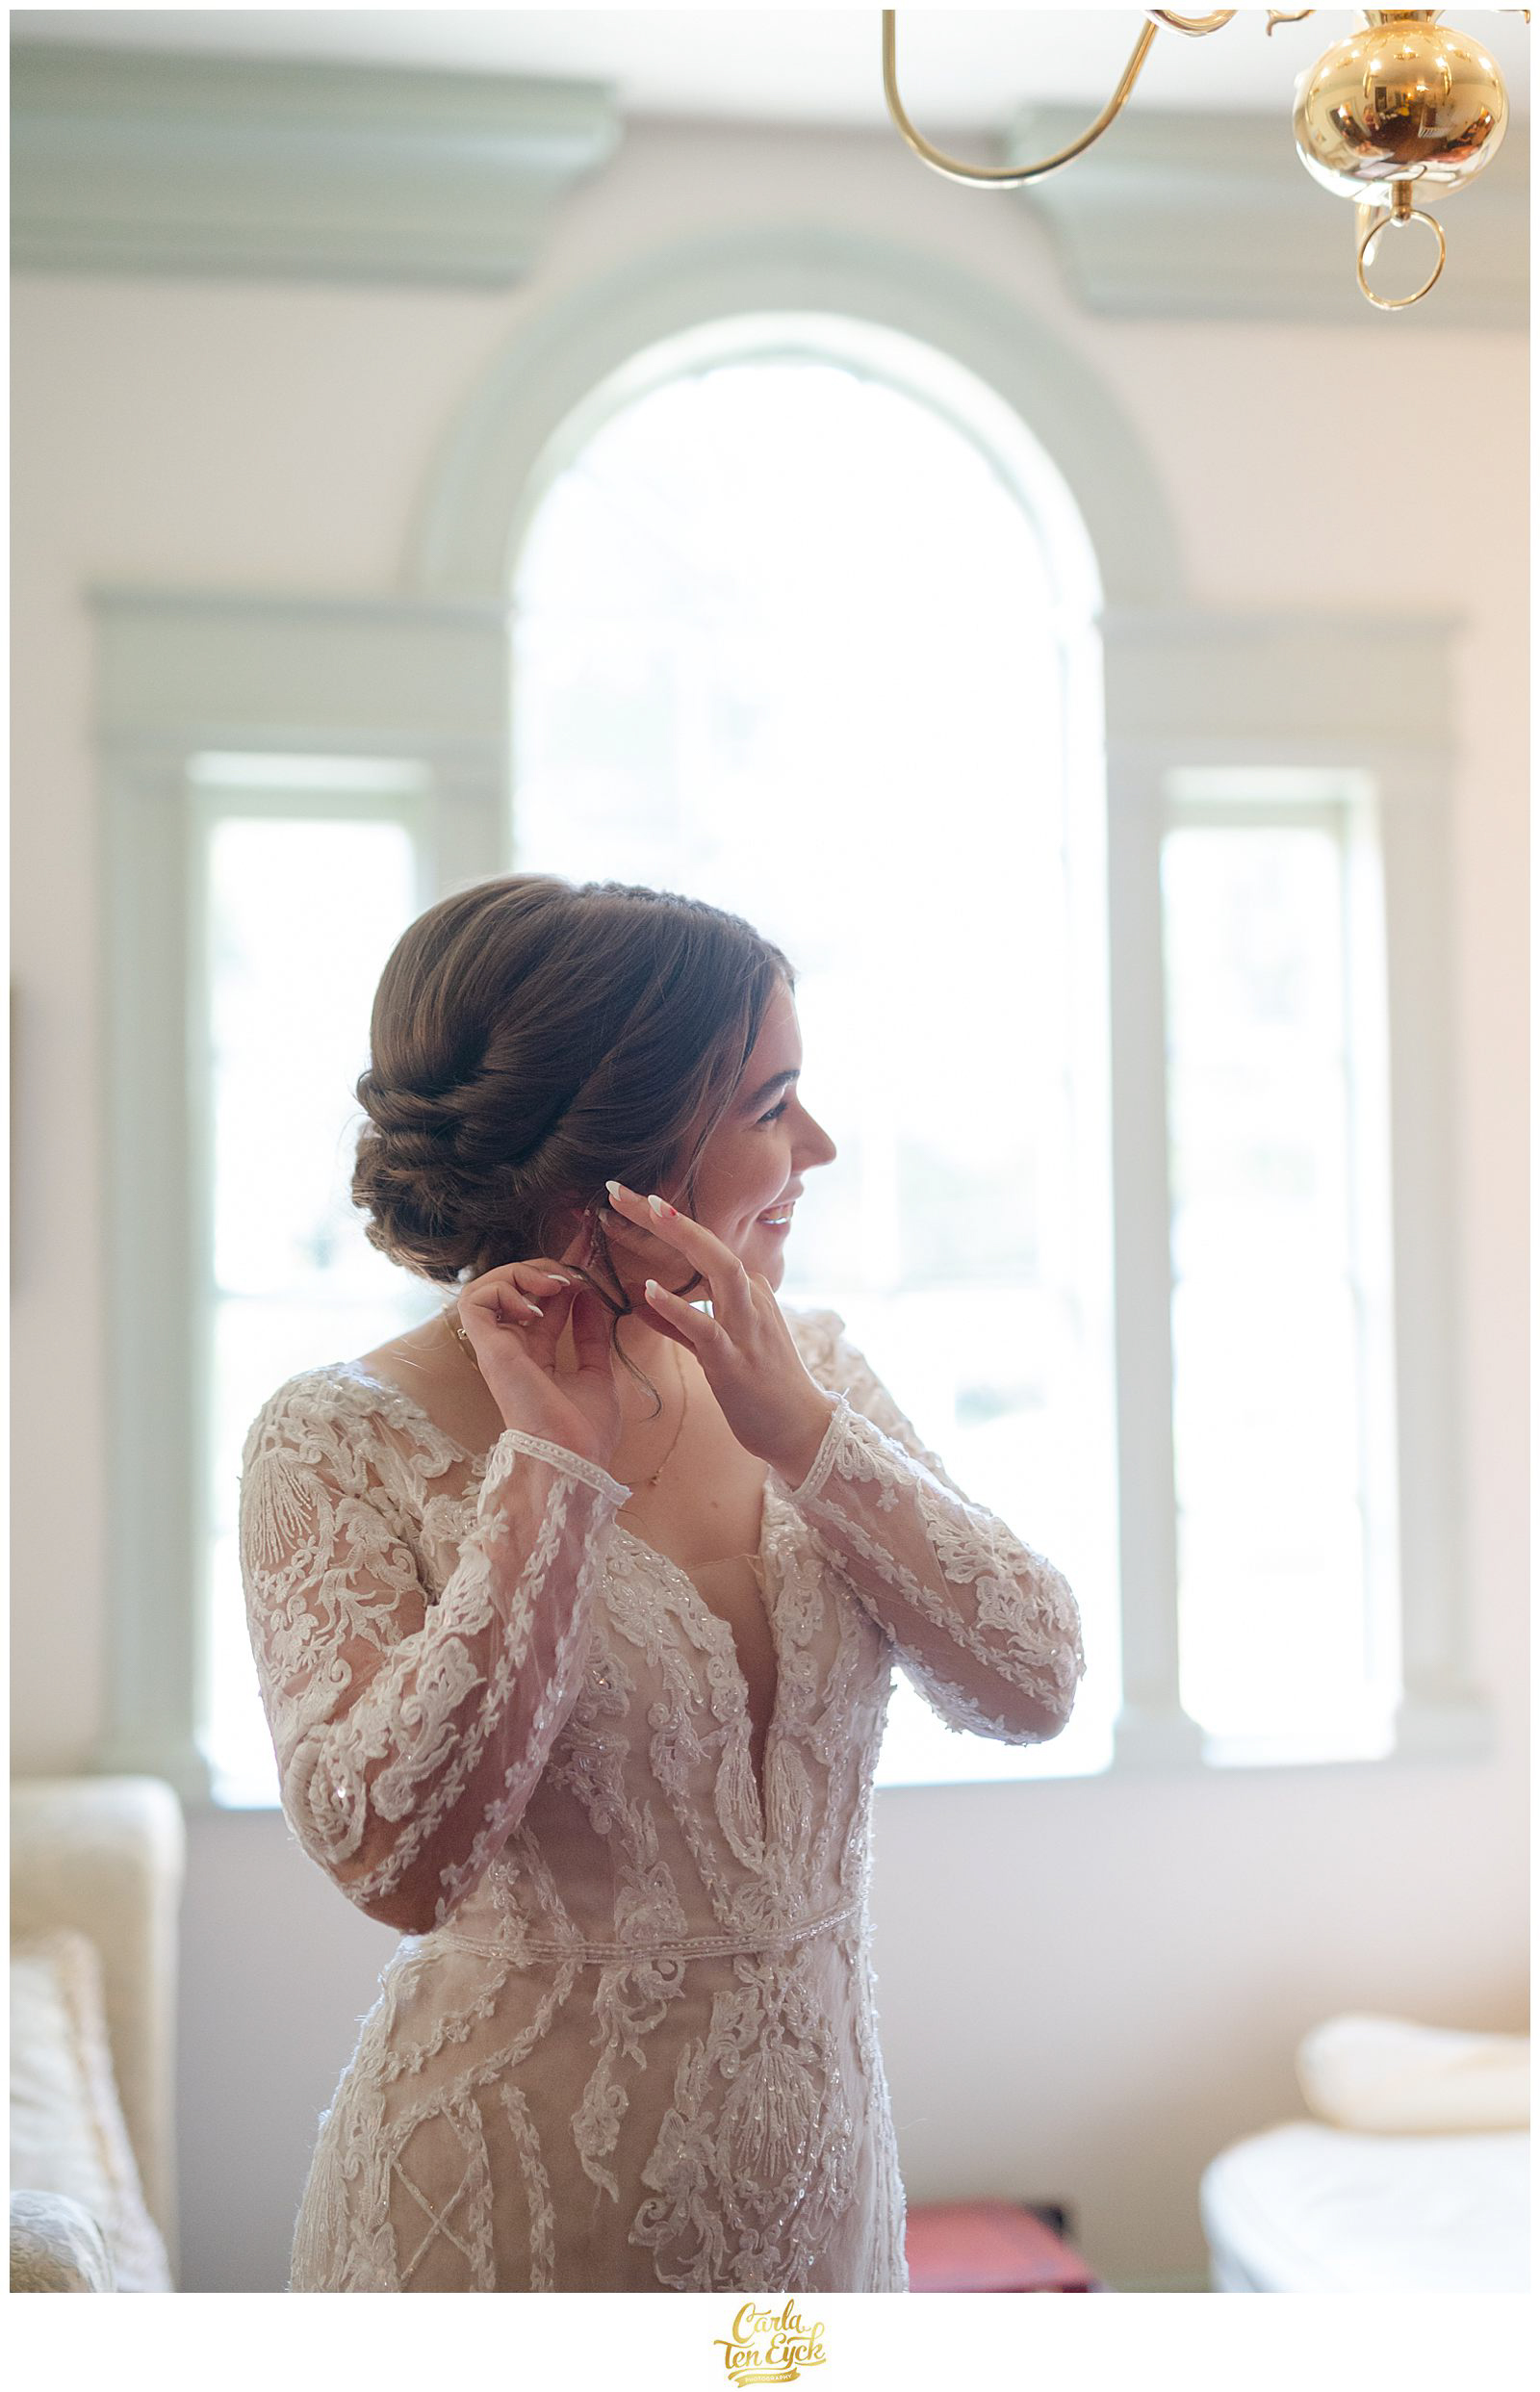 A bride gets ready for her wedding at the log cabin holyoke ma at the Daniel Stebbins House in South Hadley MA